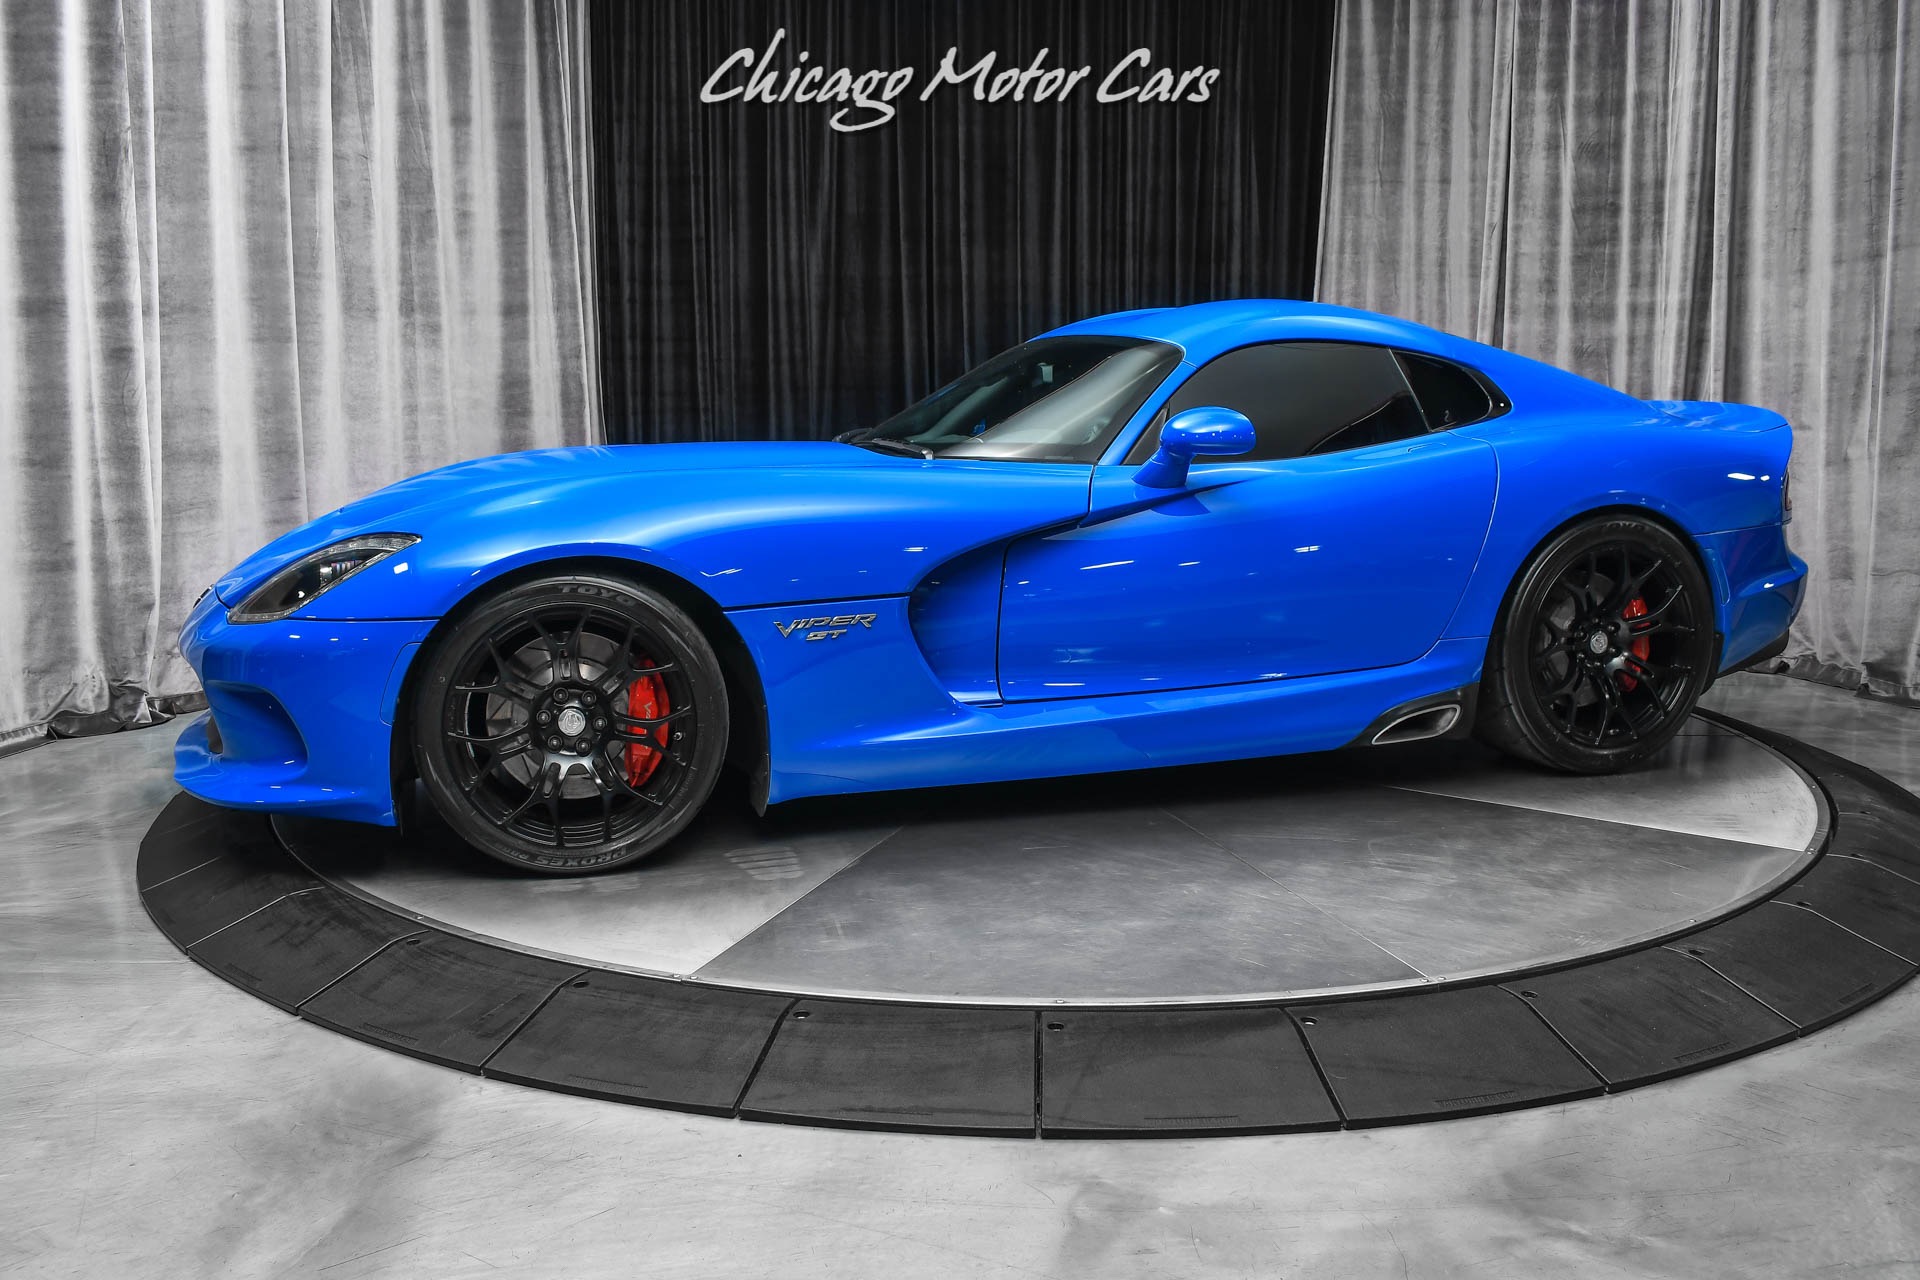 Used 2015 Dodge Viper GT Coupe NTH MOTO NA Gen V 775HP Build! Rare COMP  Blue! For Sale (Special Pricing) | Chicago Motor Cars Stock #18740